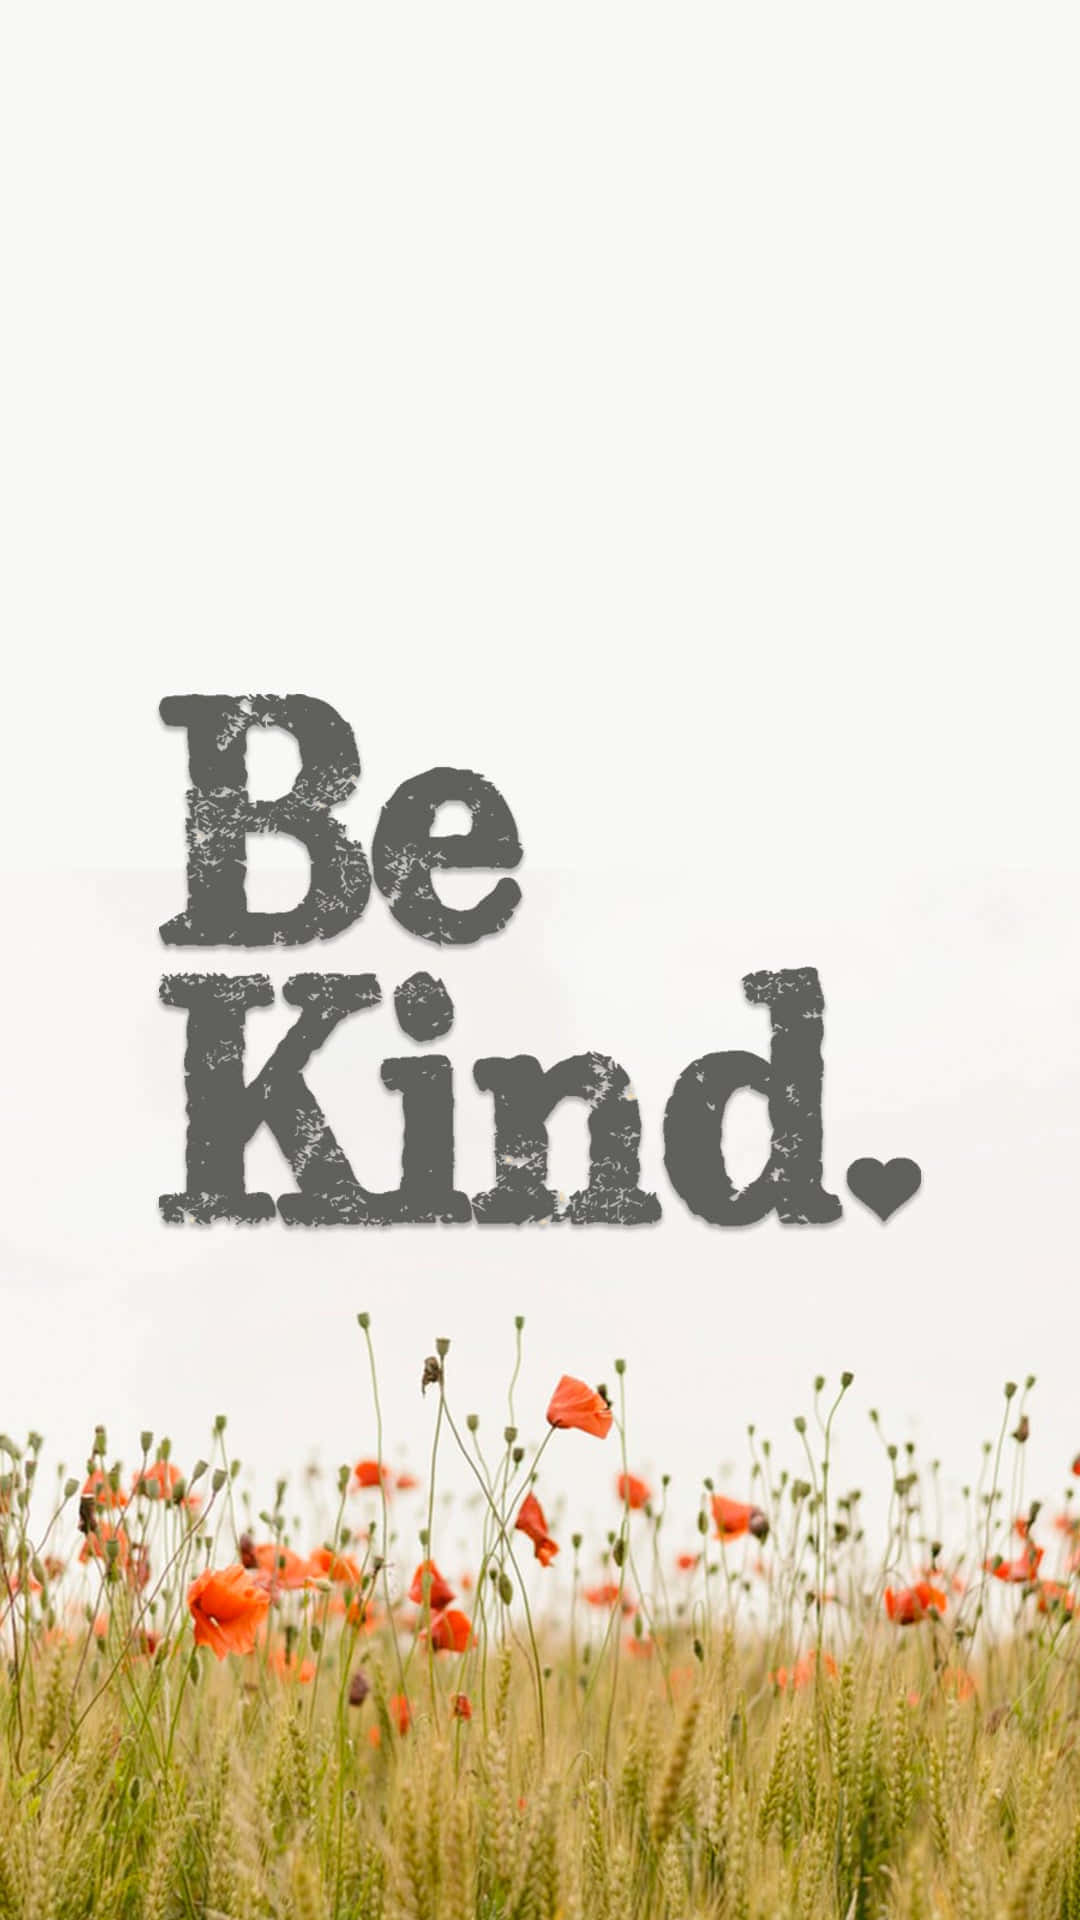 Inspirational Gray Letters Saying "Be Kind" Wallpaper